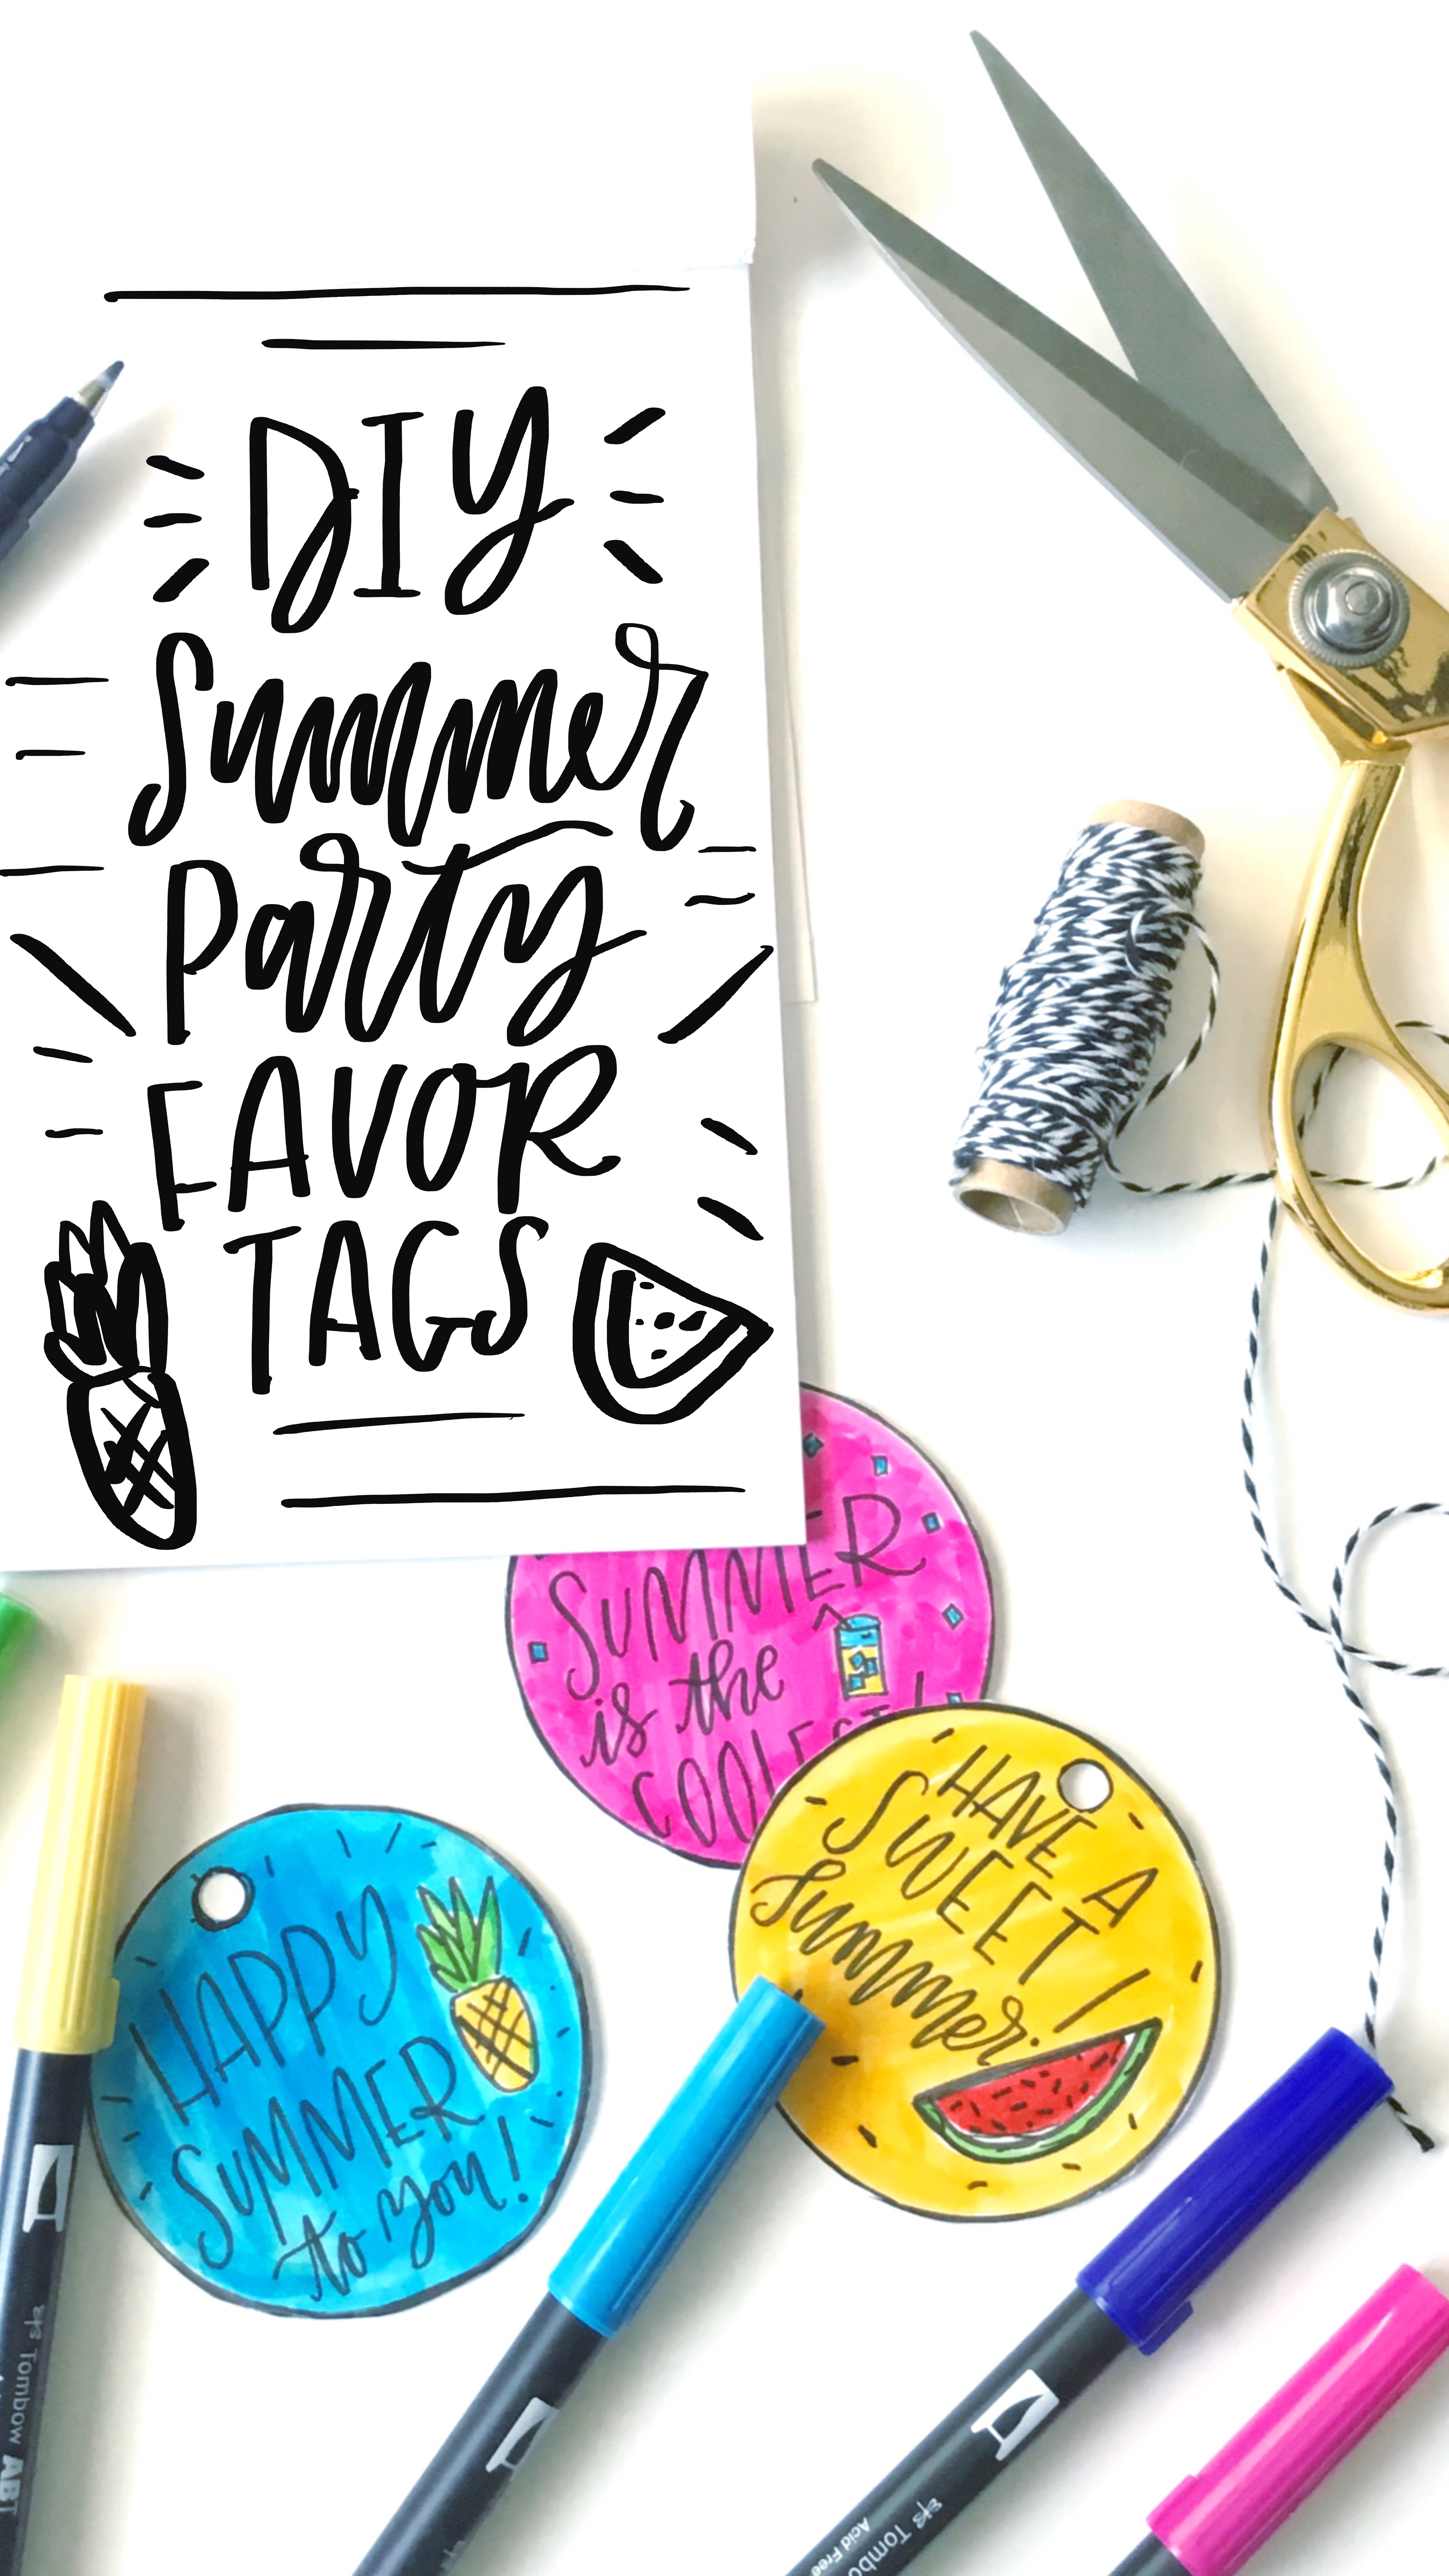 Learn to how to create your own Summer Party Favor Tags! Renmade Calligraphy's Lauren Fitzmaurice gives you lettering tips and tricks while showing you step by step how to create one of a kind party favor tags to put on perfectly curated part favors! Some fun lettering and vibrant colors complete this special project on blog.tombowusa.com. For more lettering and craft content check out @renmadecalligraphy on instagram and renmadecalligraphy.com.